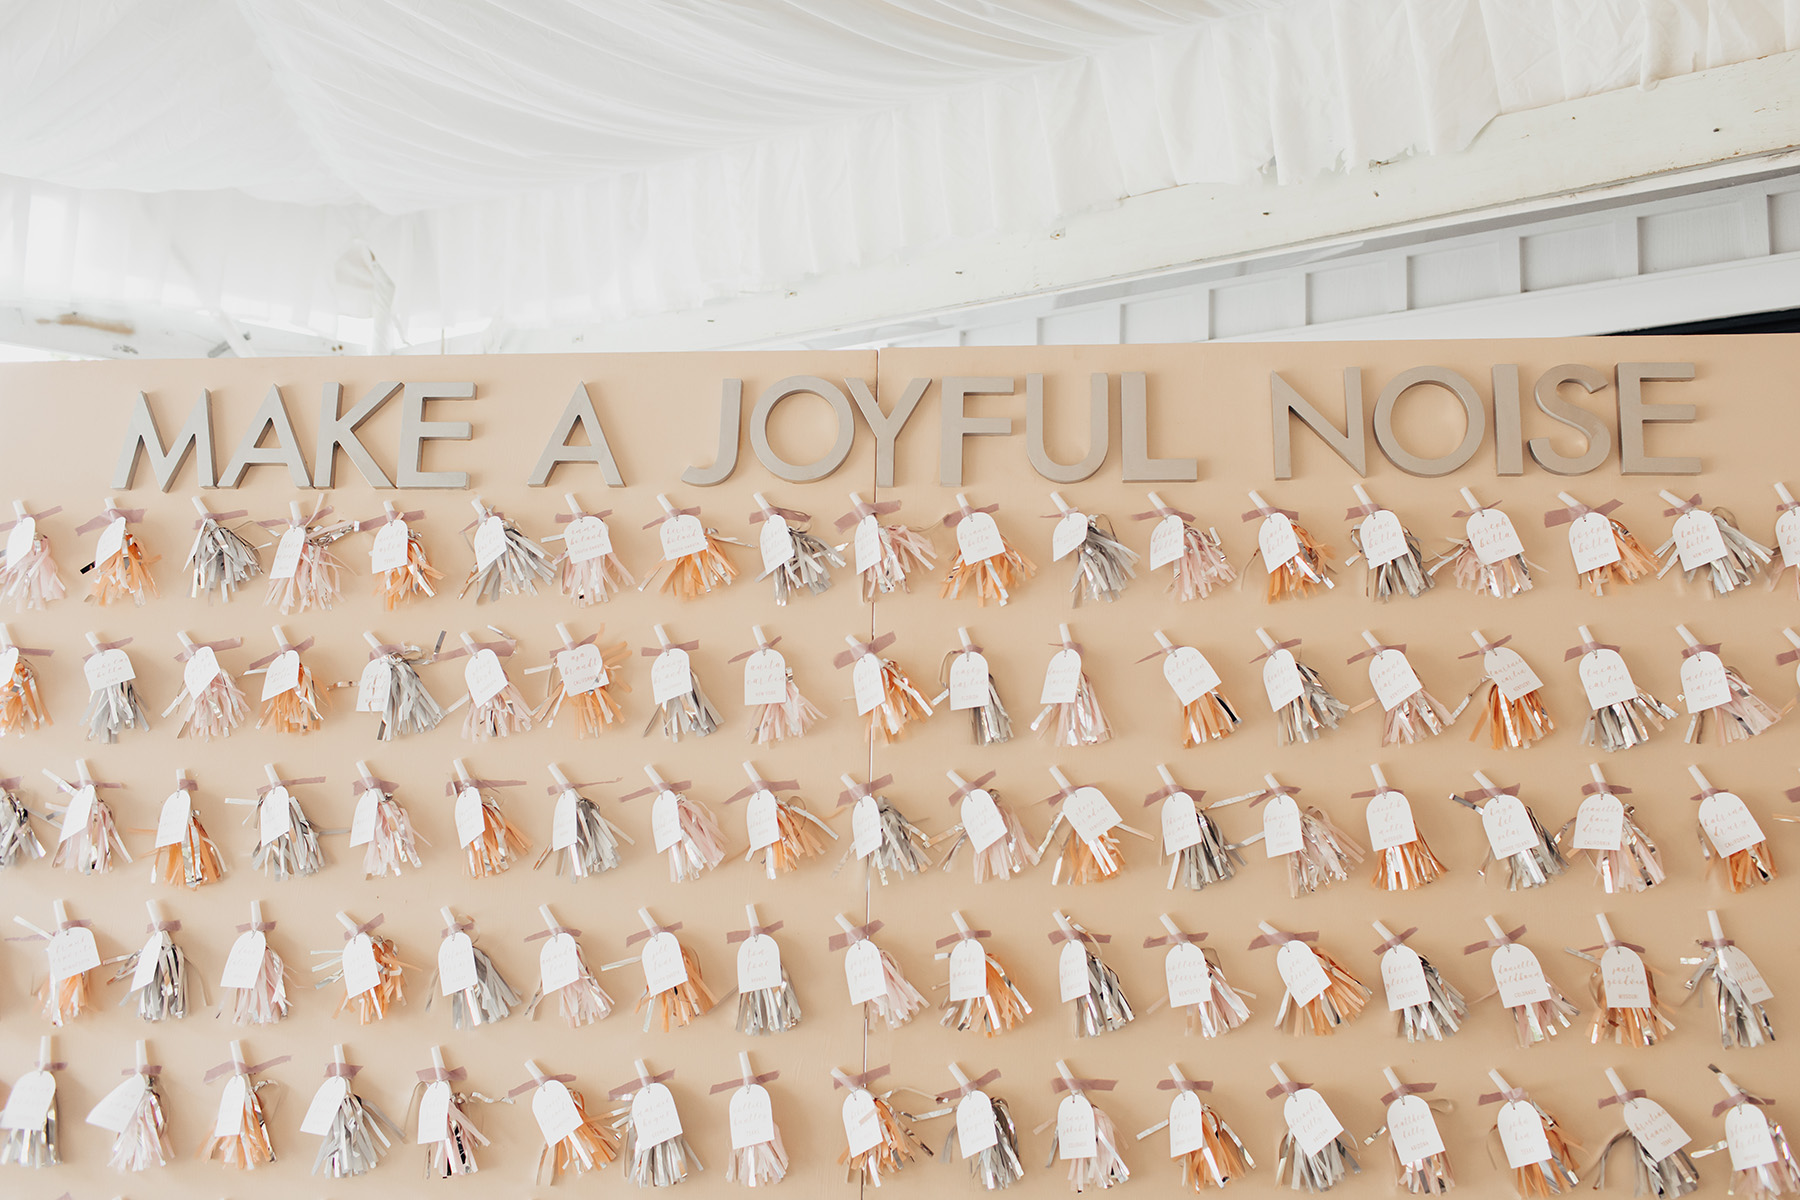 This noisemaker seating chart is a whimsical wedding decor idea.